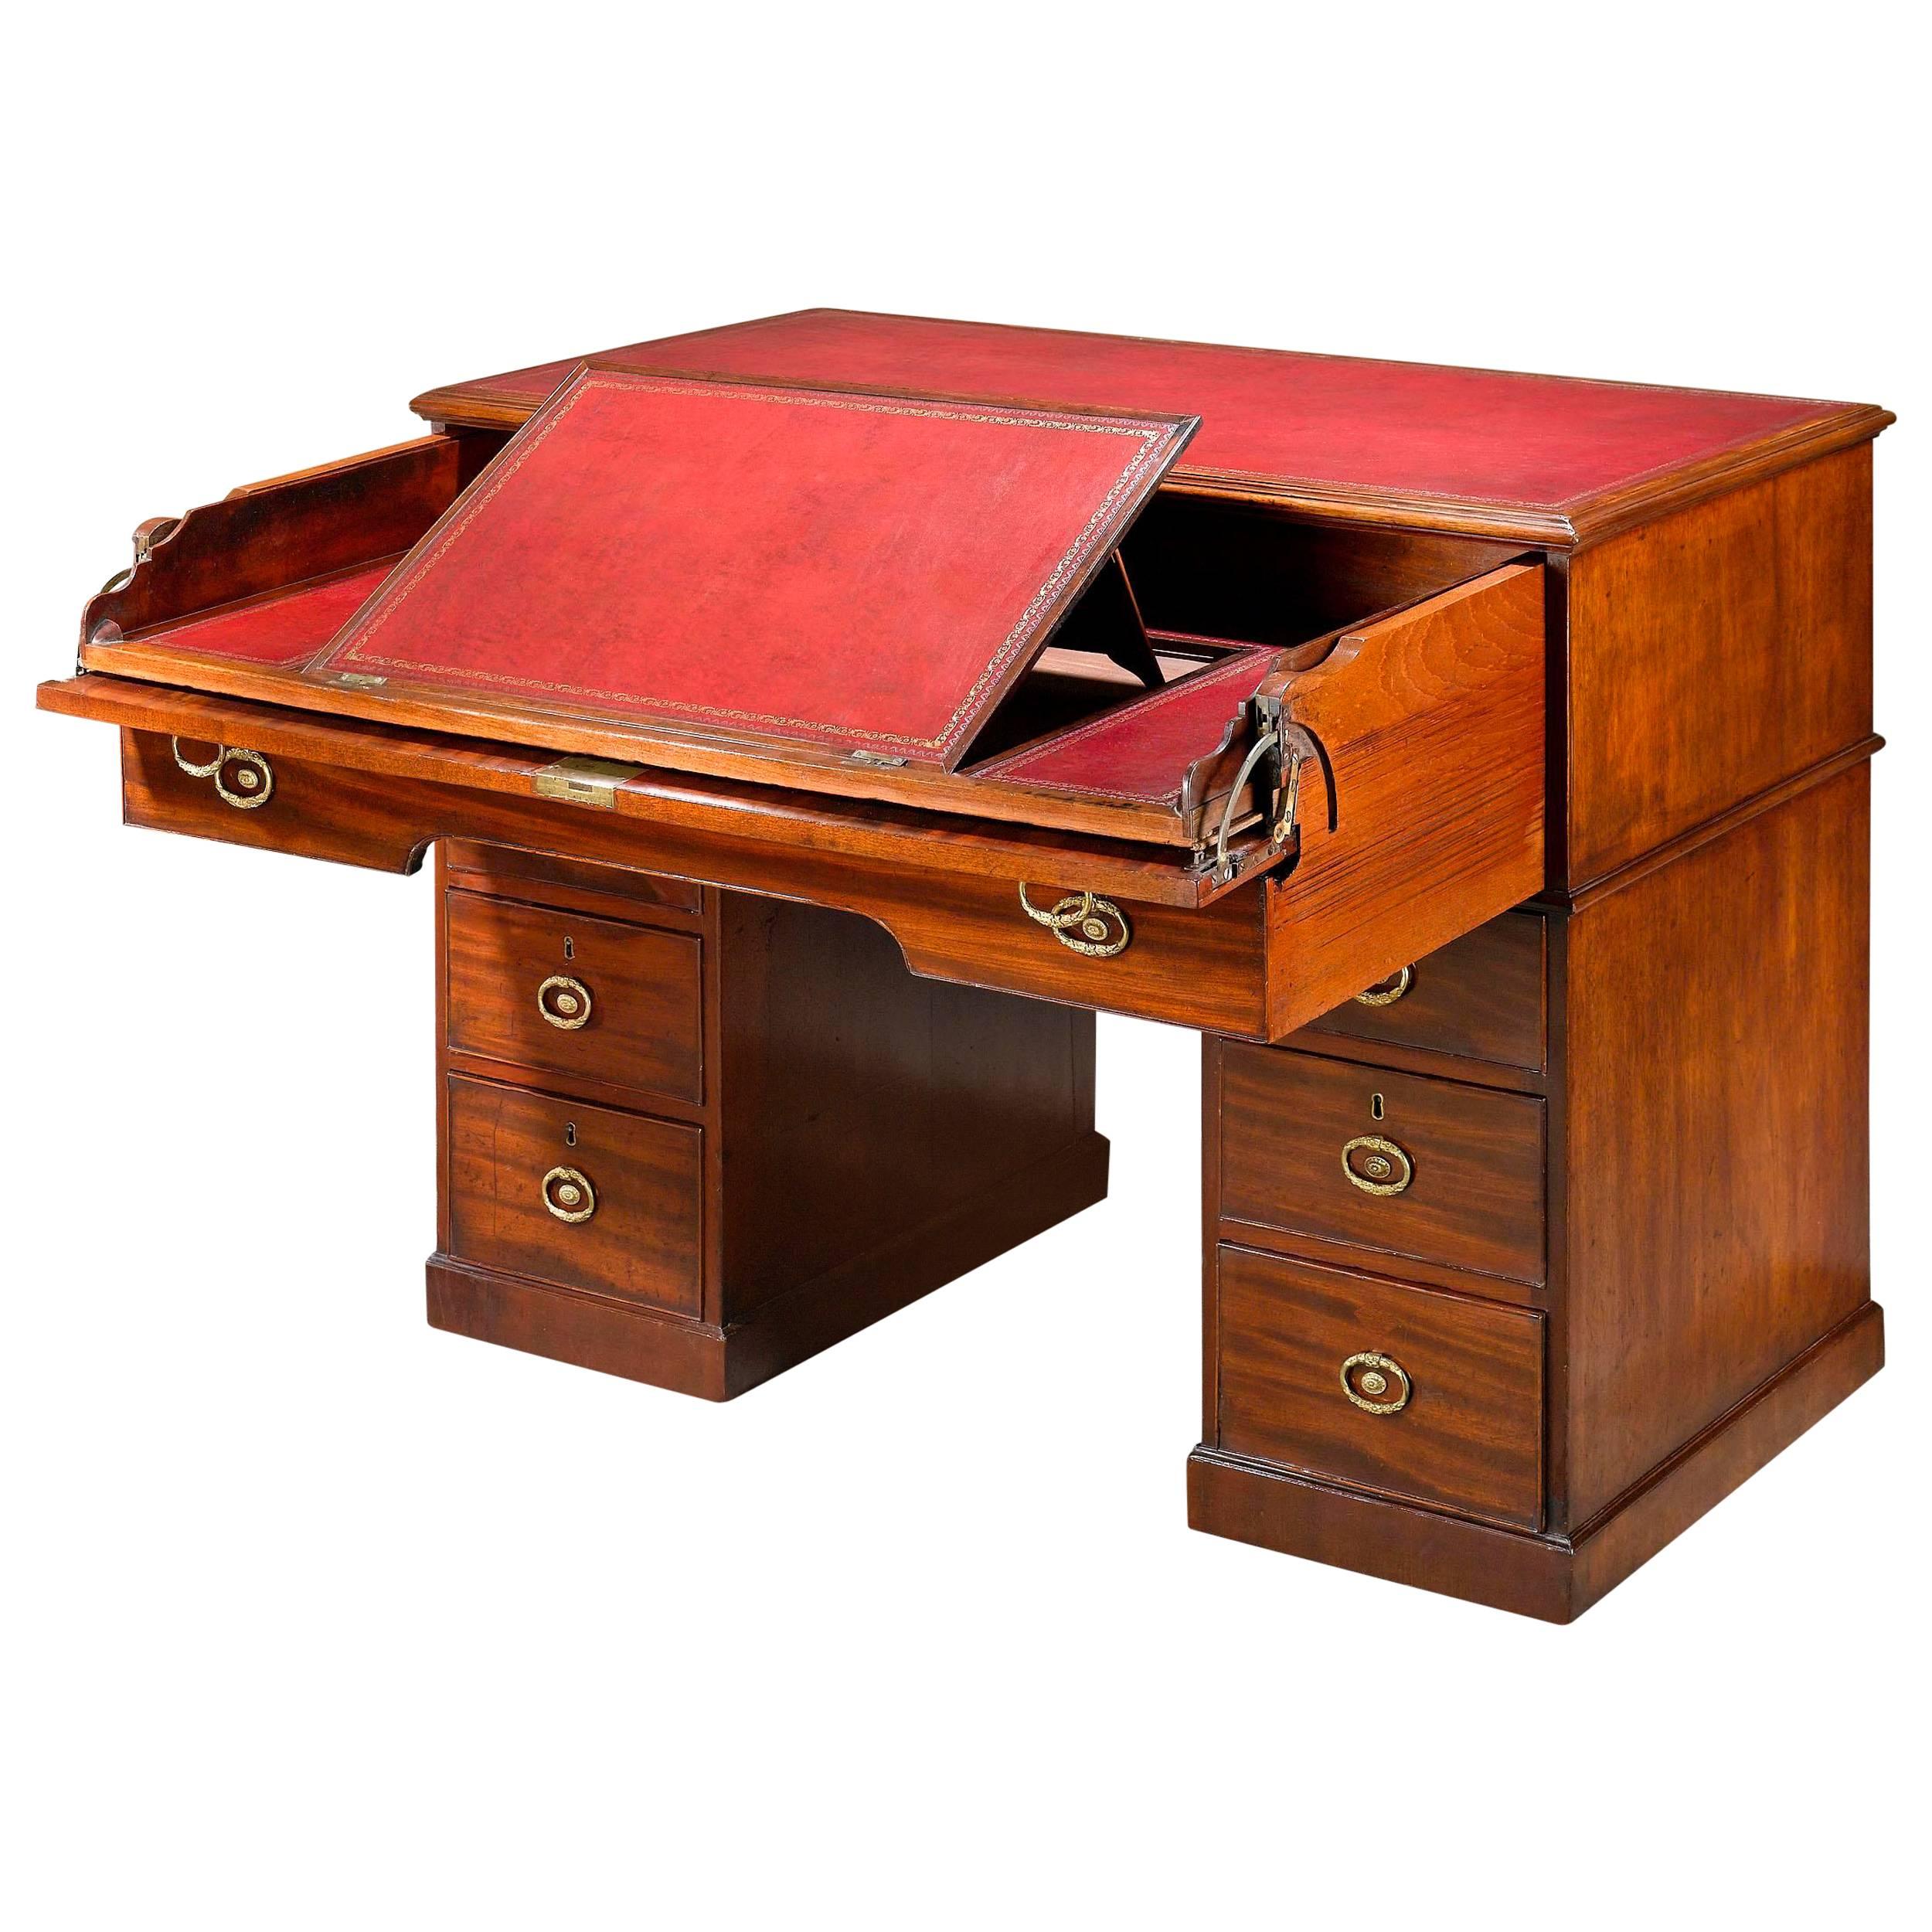 18th Century Architect's Desk by Gillows of Lancaster